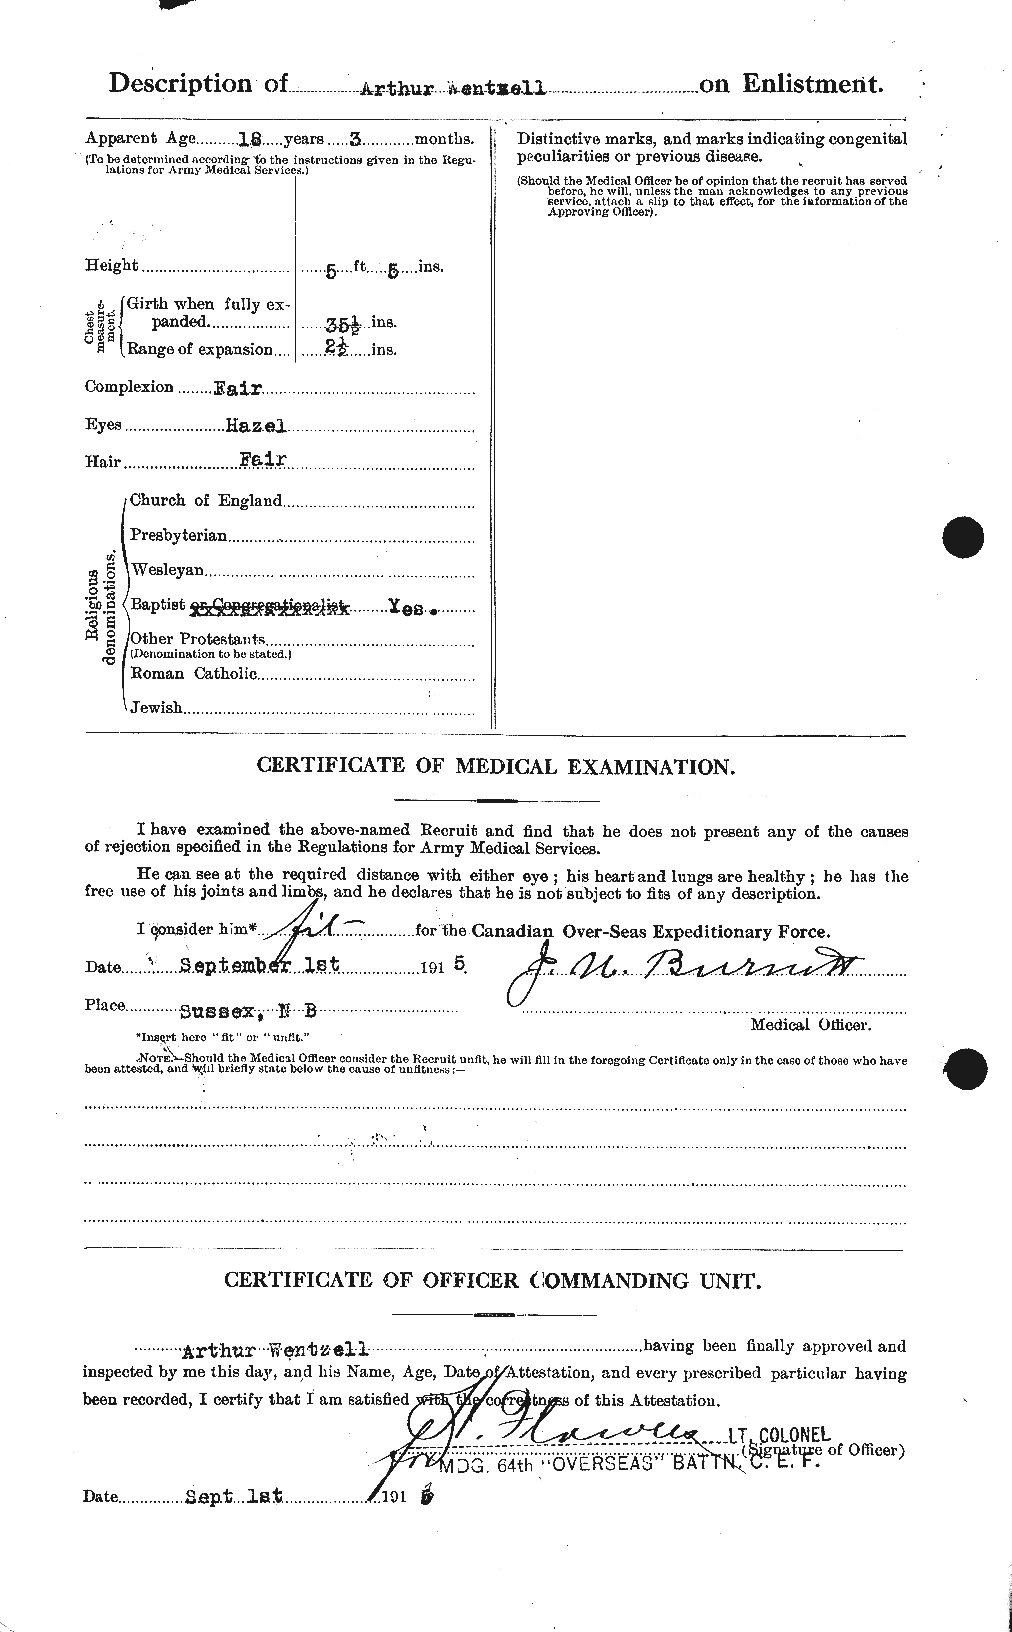 Personnel Records of the First World War - CEF 664642b